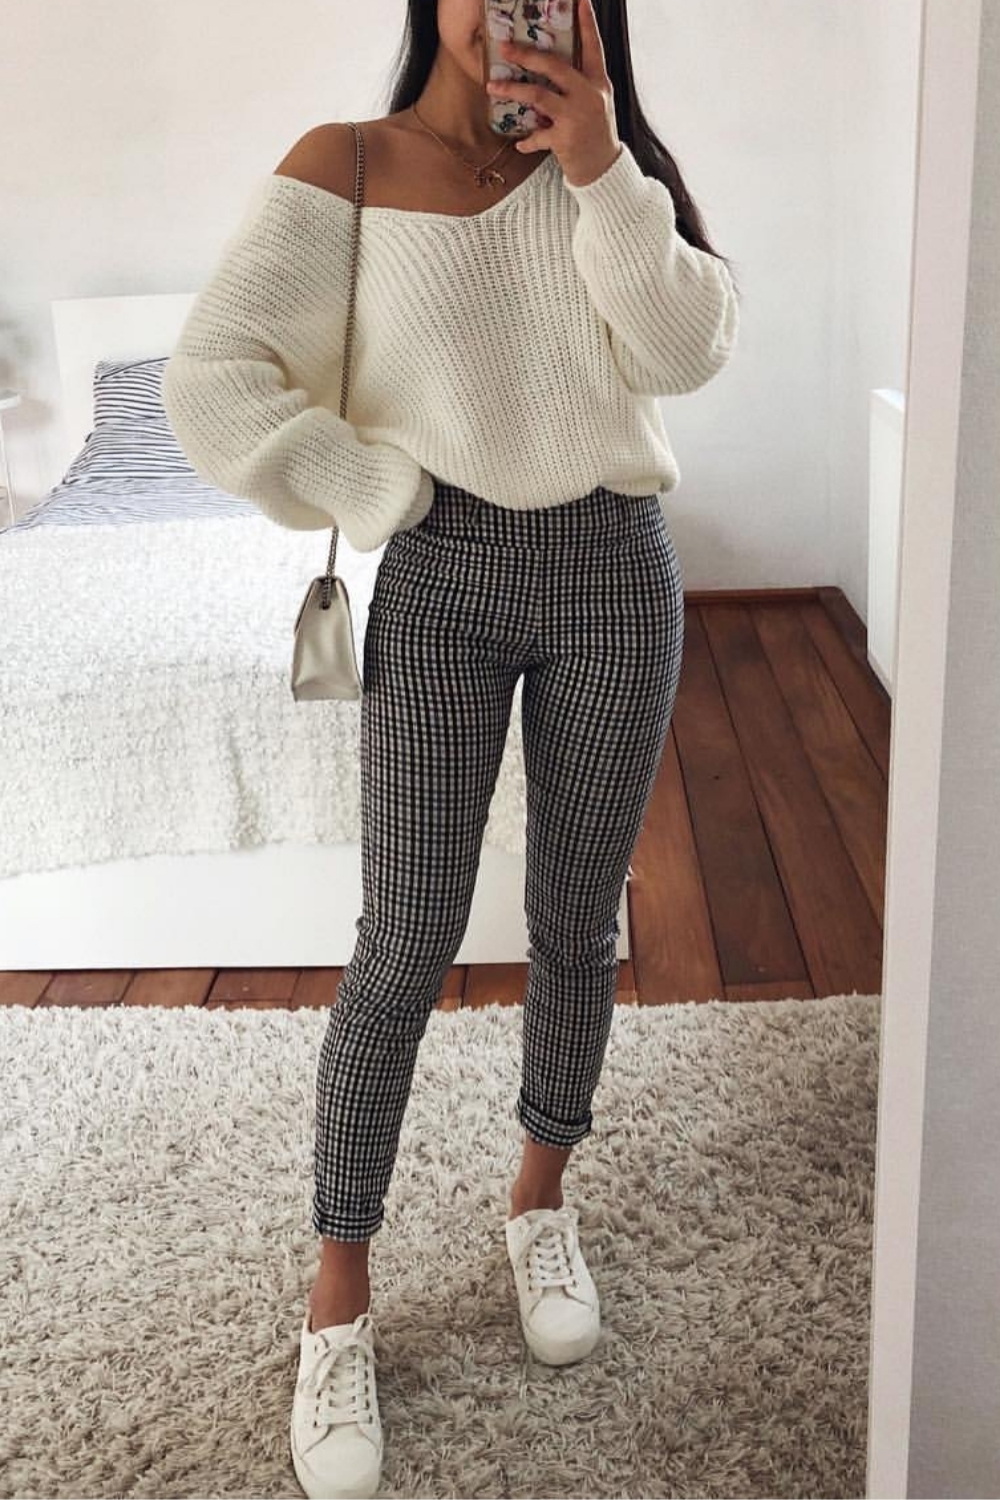 ladies winter outfits 2019